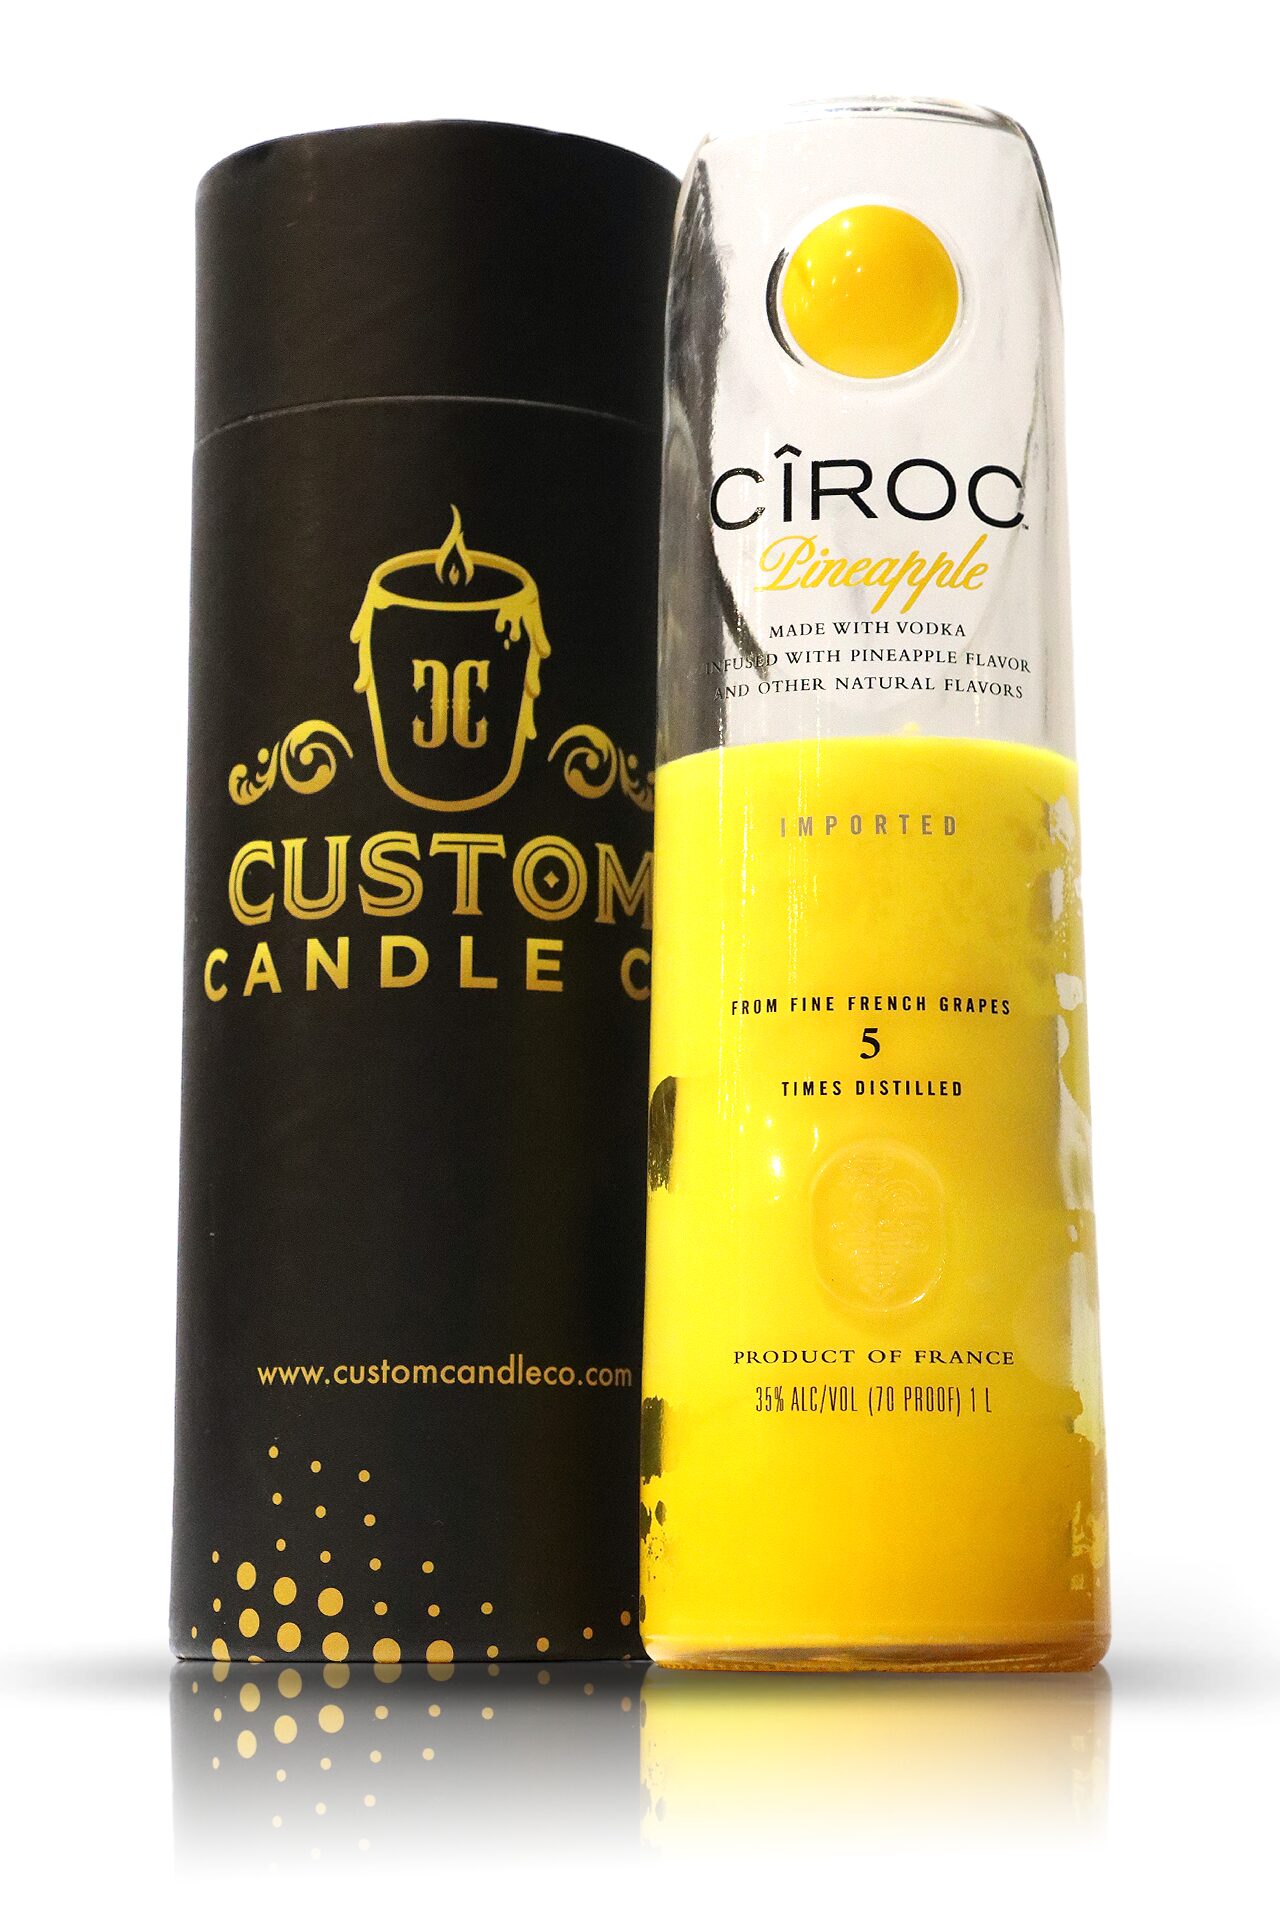 A black and yellow Recycled Vodka Candle - Ciroc Pineapple.